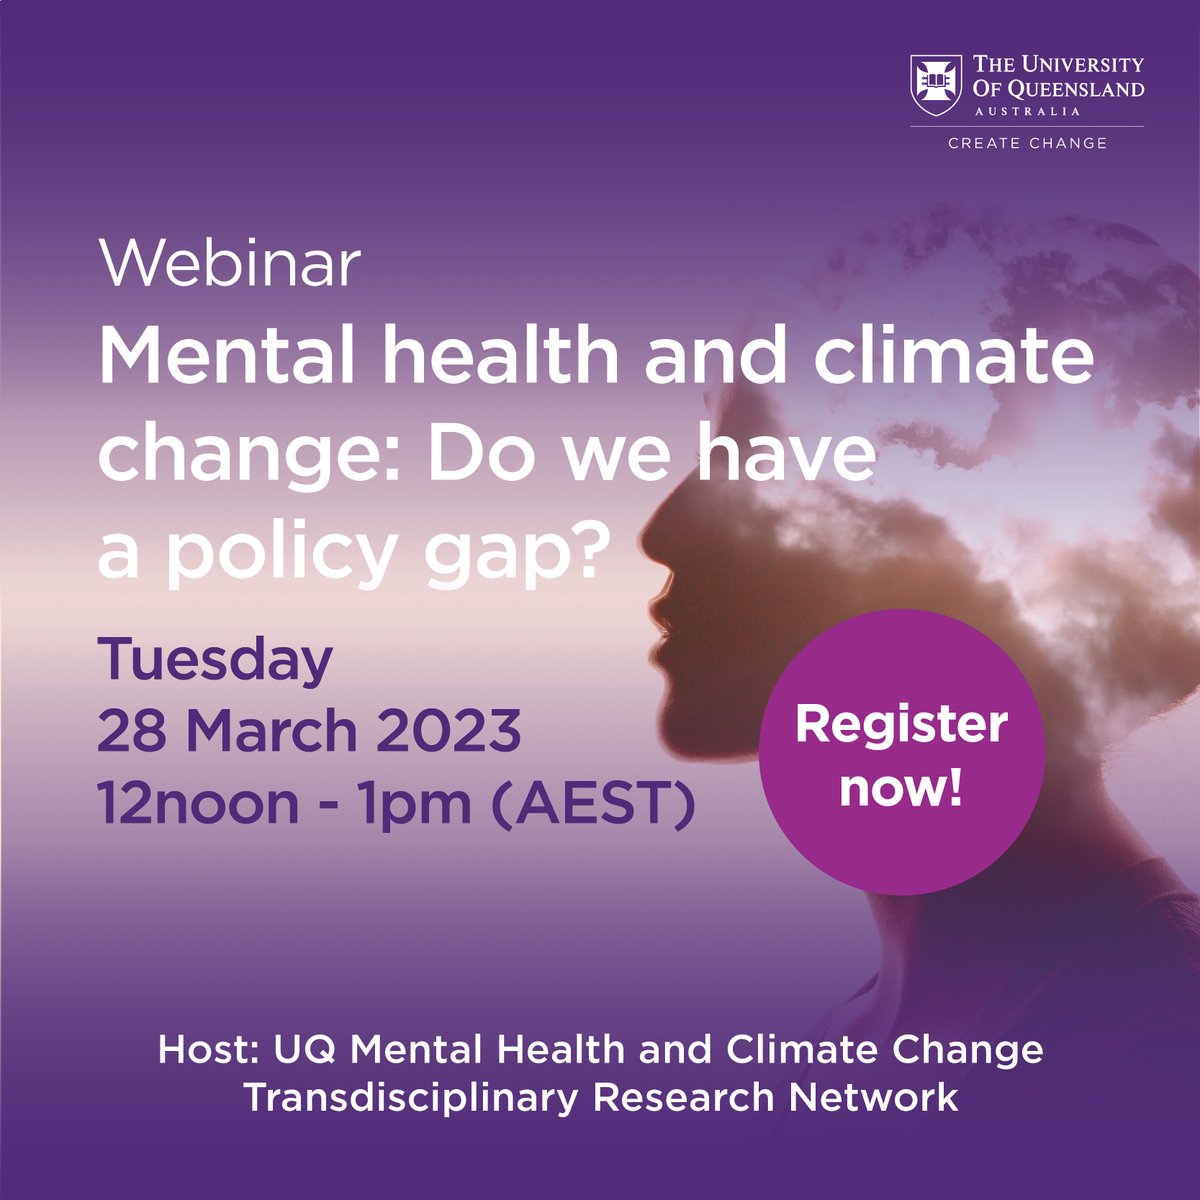 Mental health and #ClimateChange: Do we have a policy gap? - come along to our free webinar on Tuesday 28 March 2023, 12noon - 1pm AEST - Register here: bit.ly/3FCQm11 Facilitated by @FionaCharlson with panelists @farm_strong @bekpatrick